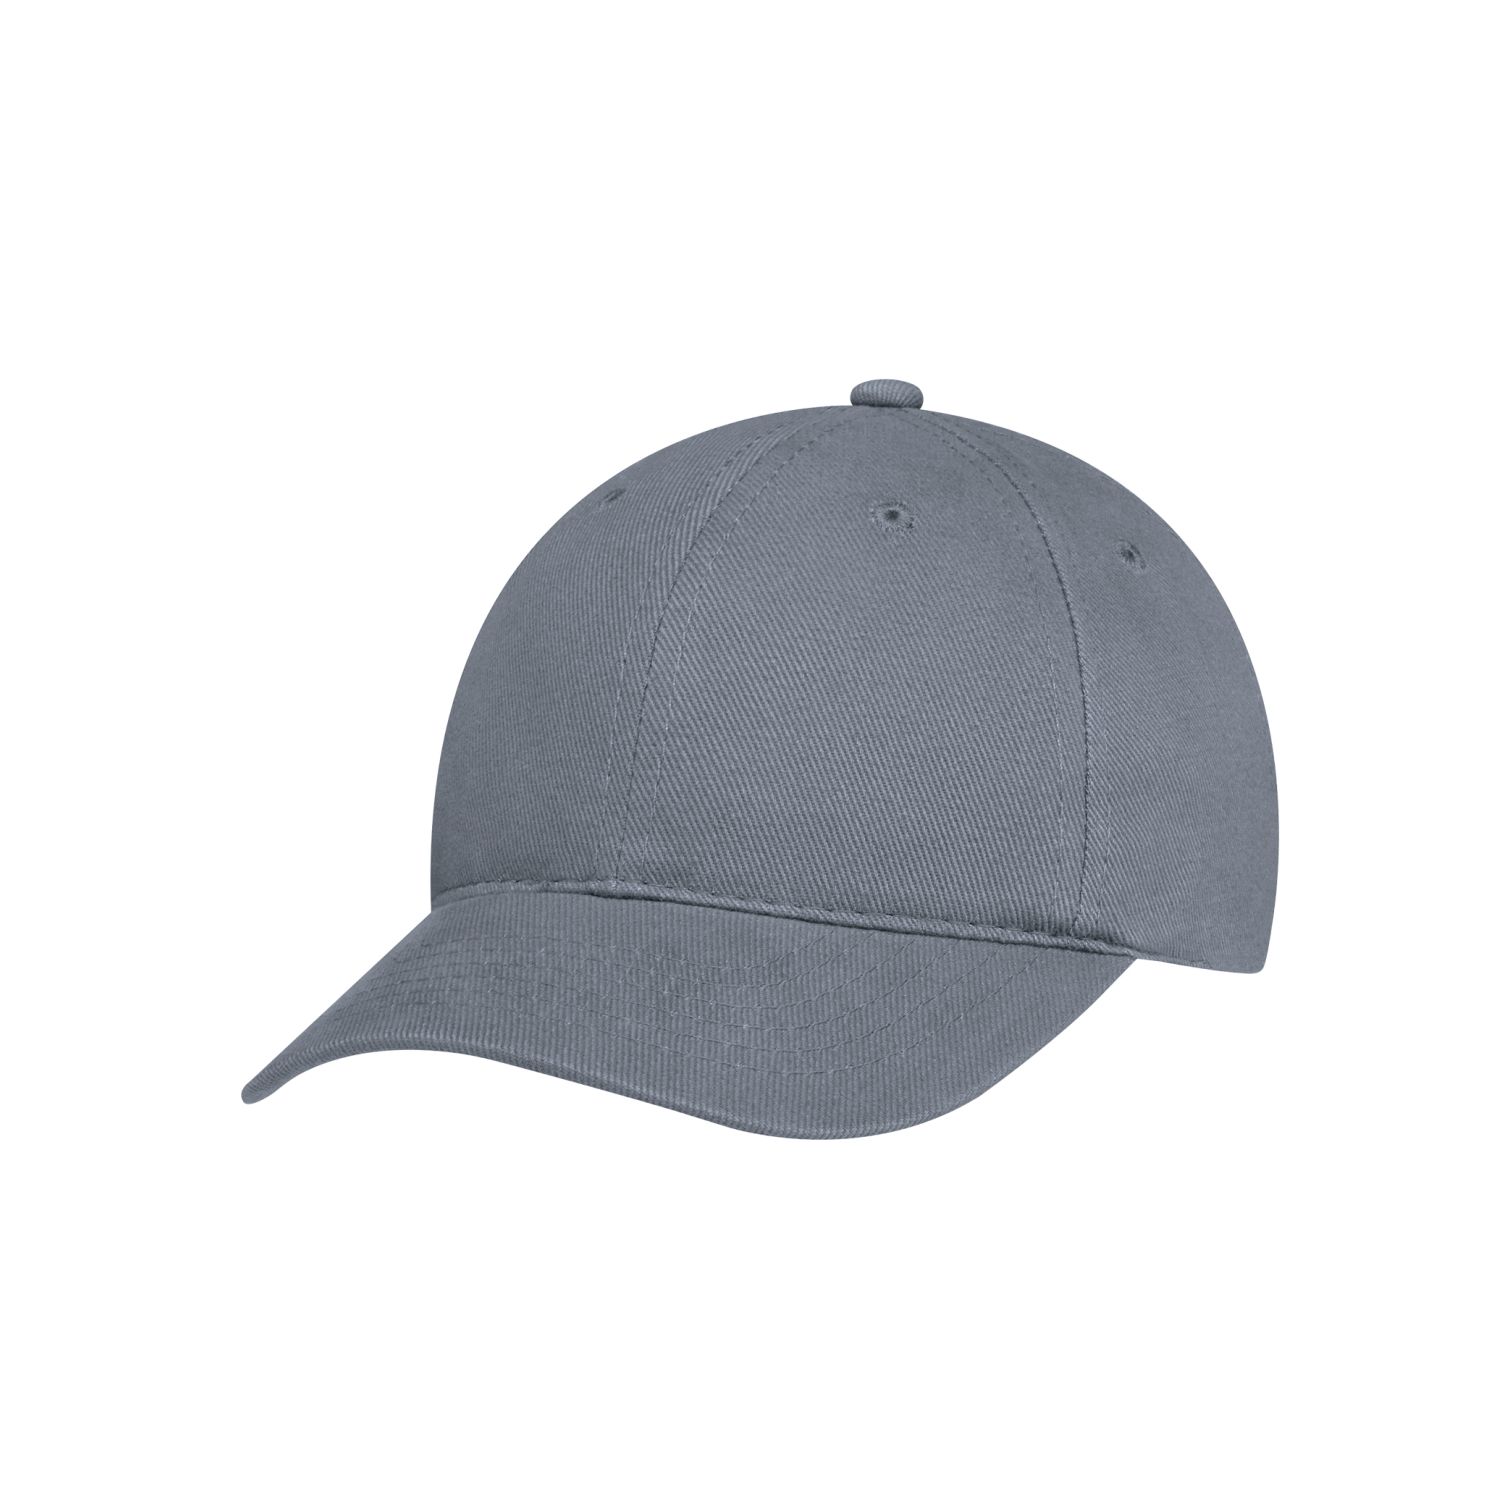 AJM Heavyweight Brushed Cotton Drill 6 Panel Constructed Contour Hat #2C390M Charcoal